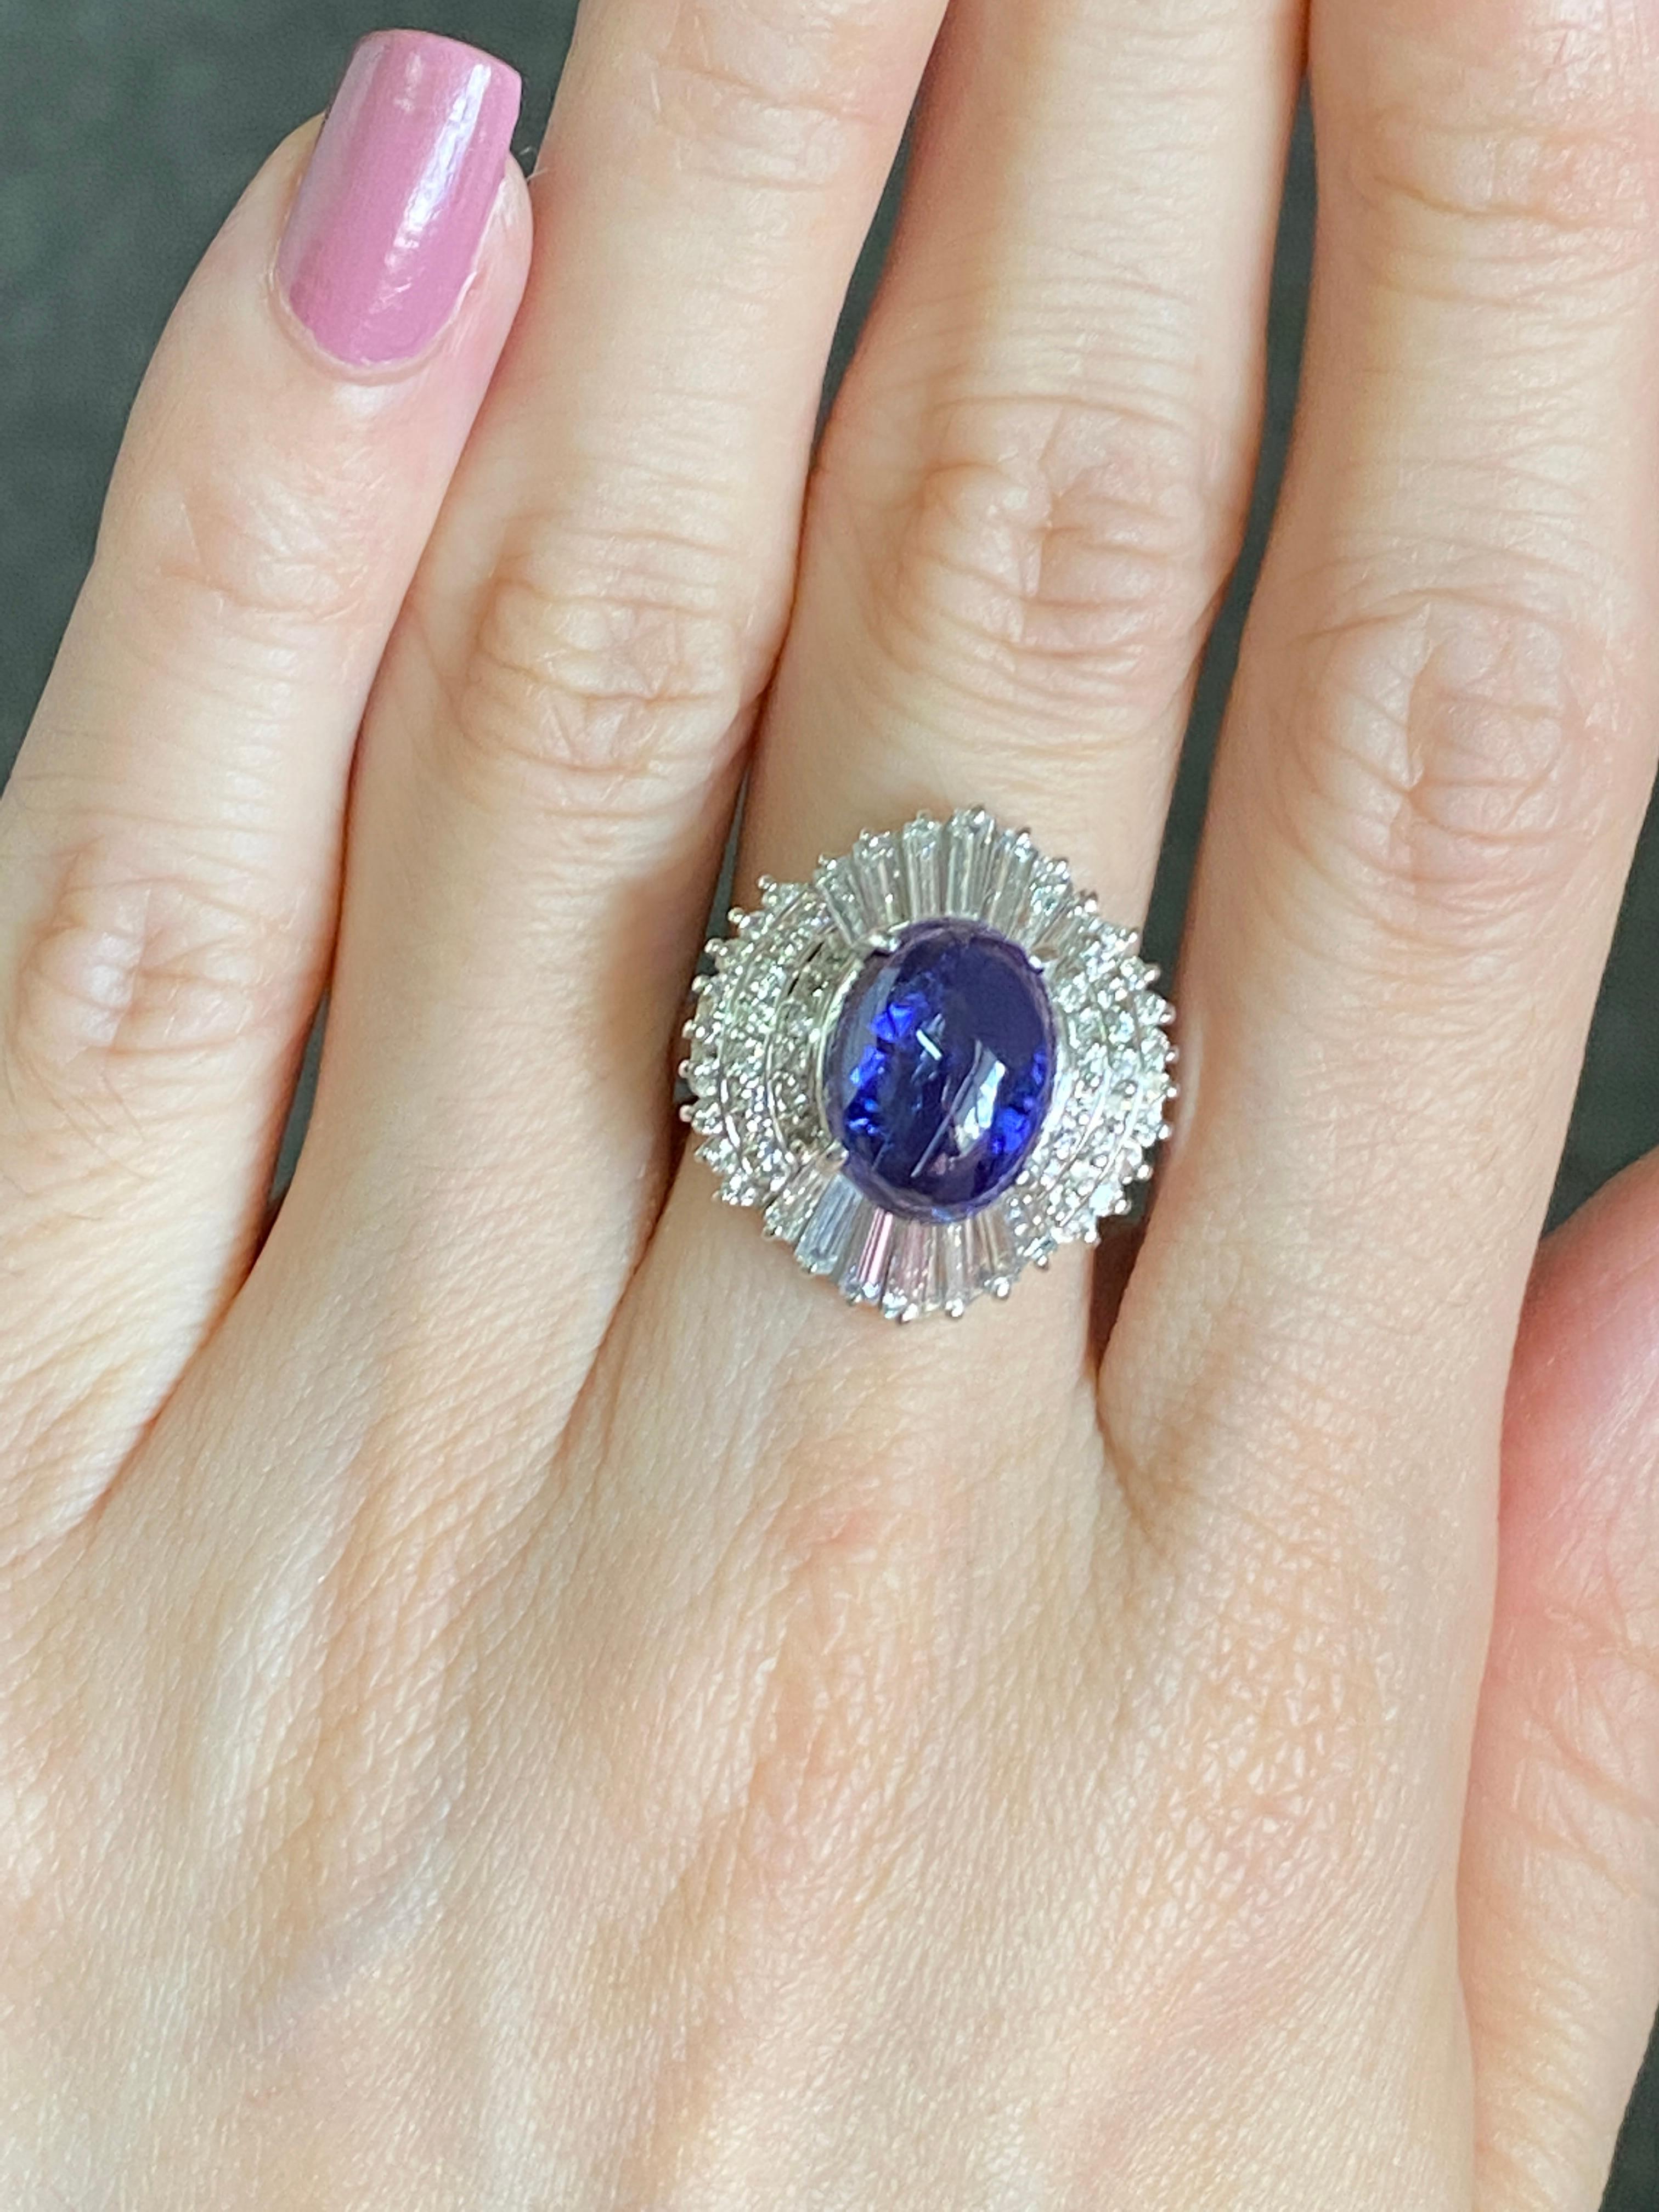 A 5.63 carat Tanzanite Cabochon set in a classic, art-deco looking setting with  1.69 carat Diamond Baguettes and Rounds. The ring is made using 10.45 grams of Platinum. The centre stone is a natural tanzanite, which is absolutely transparent and